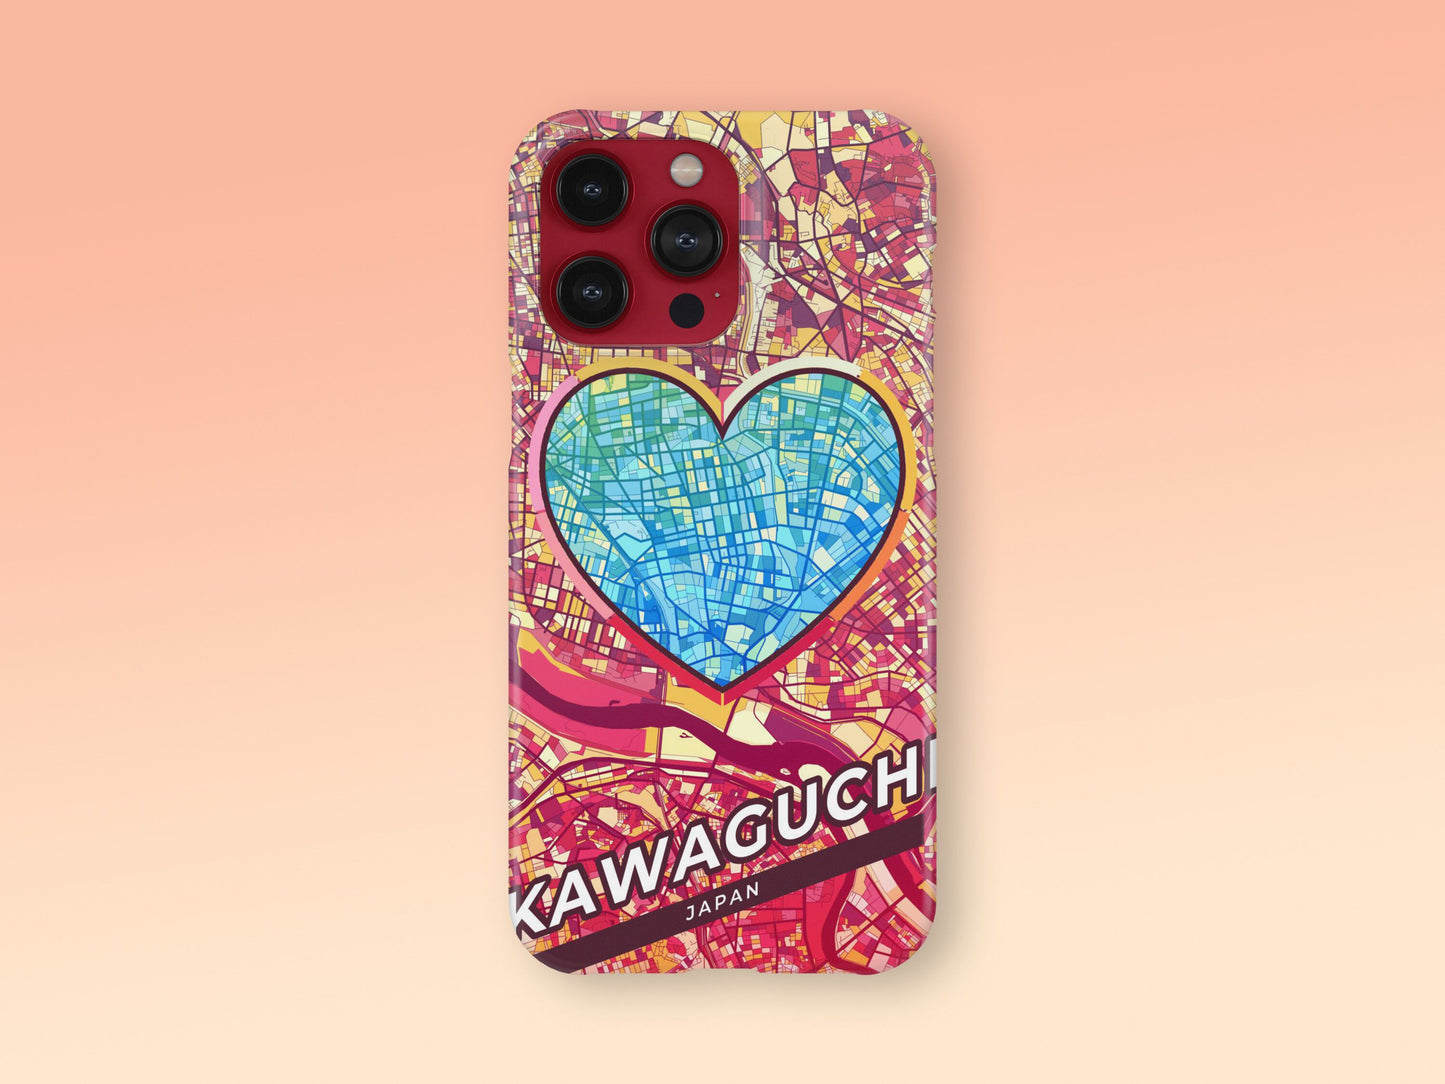 Kawaguchi Japan slim phone case with colorful icon. Birthday, wedding or housewarming gift. Couple match cases. 2